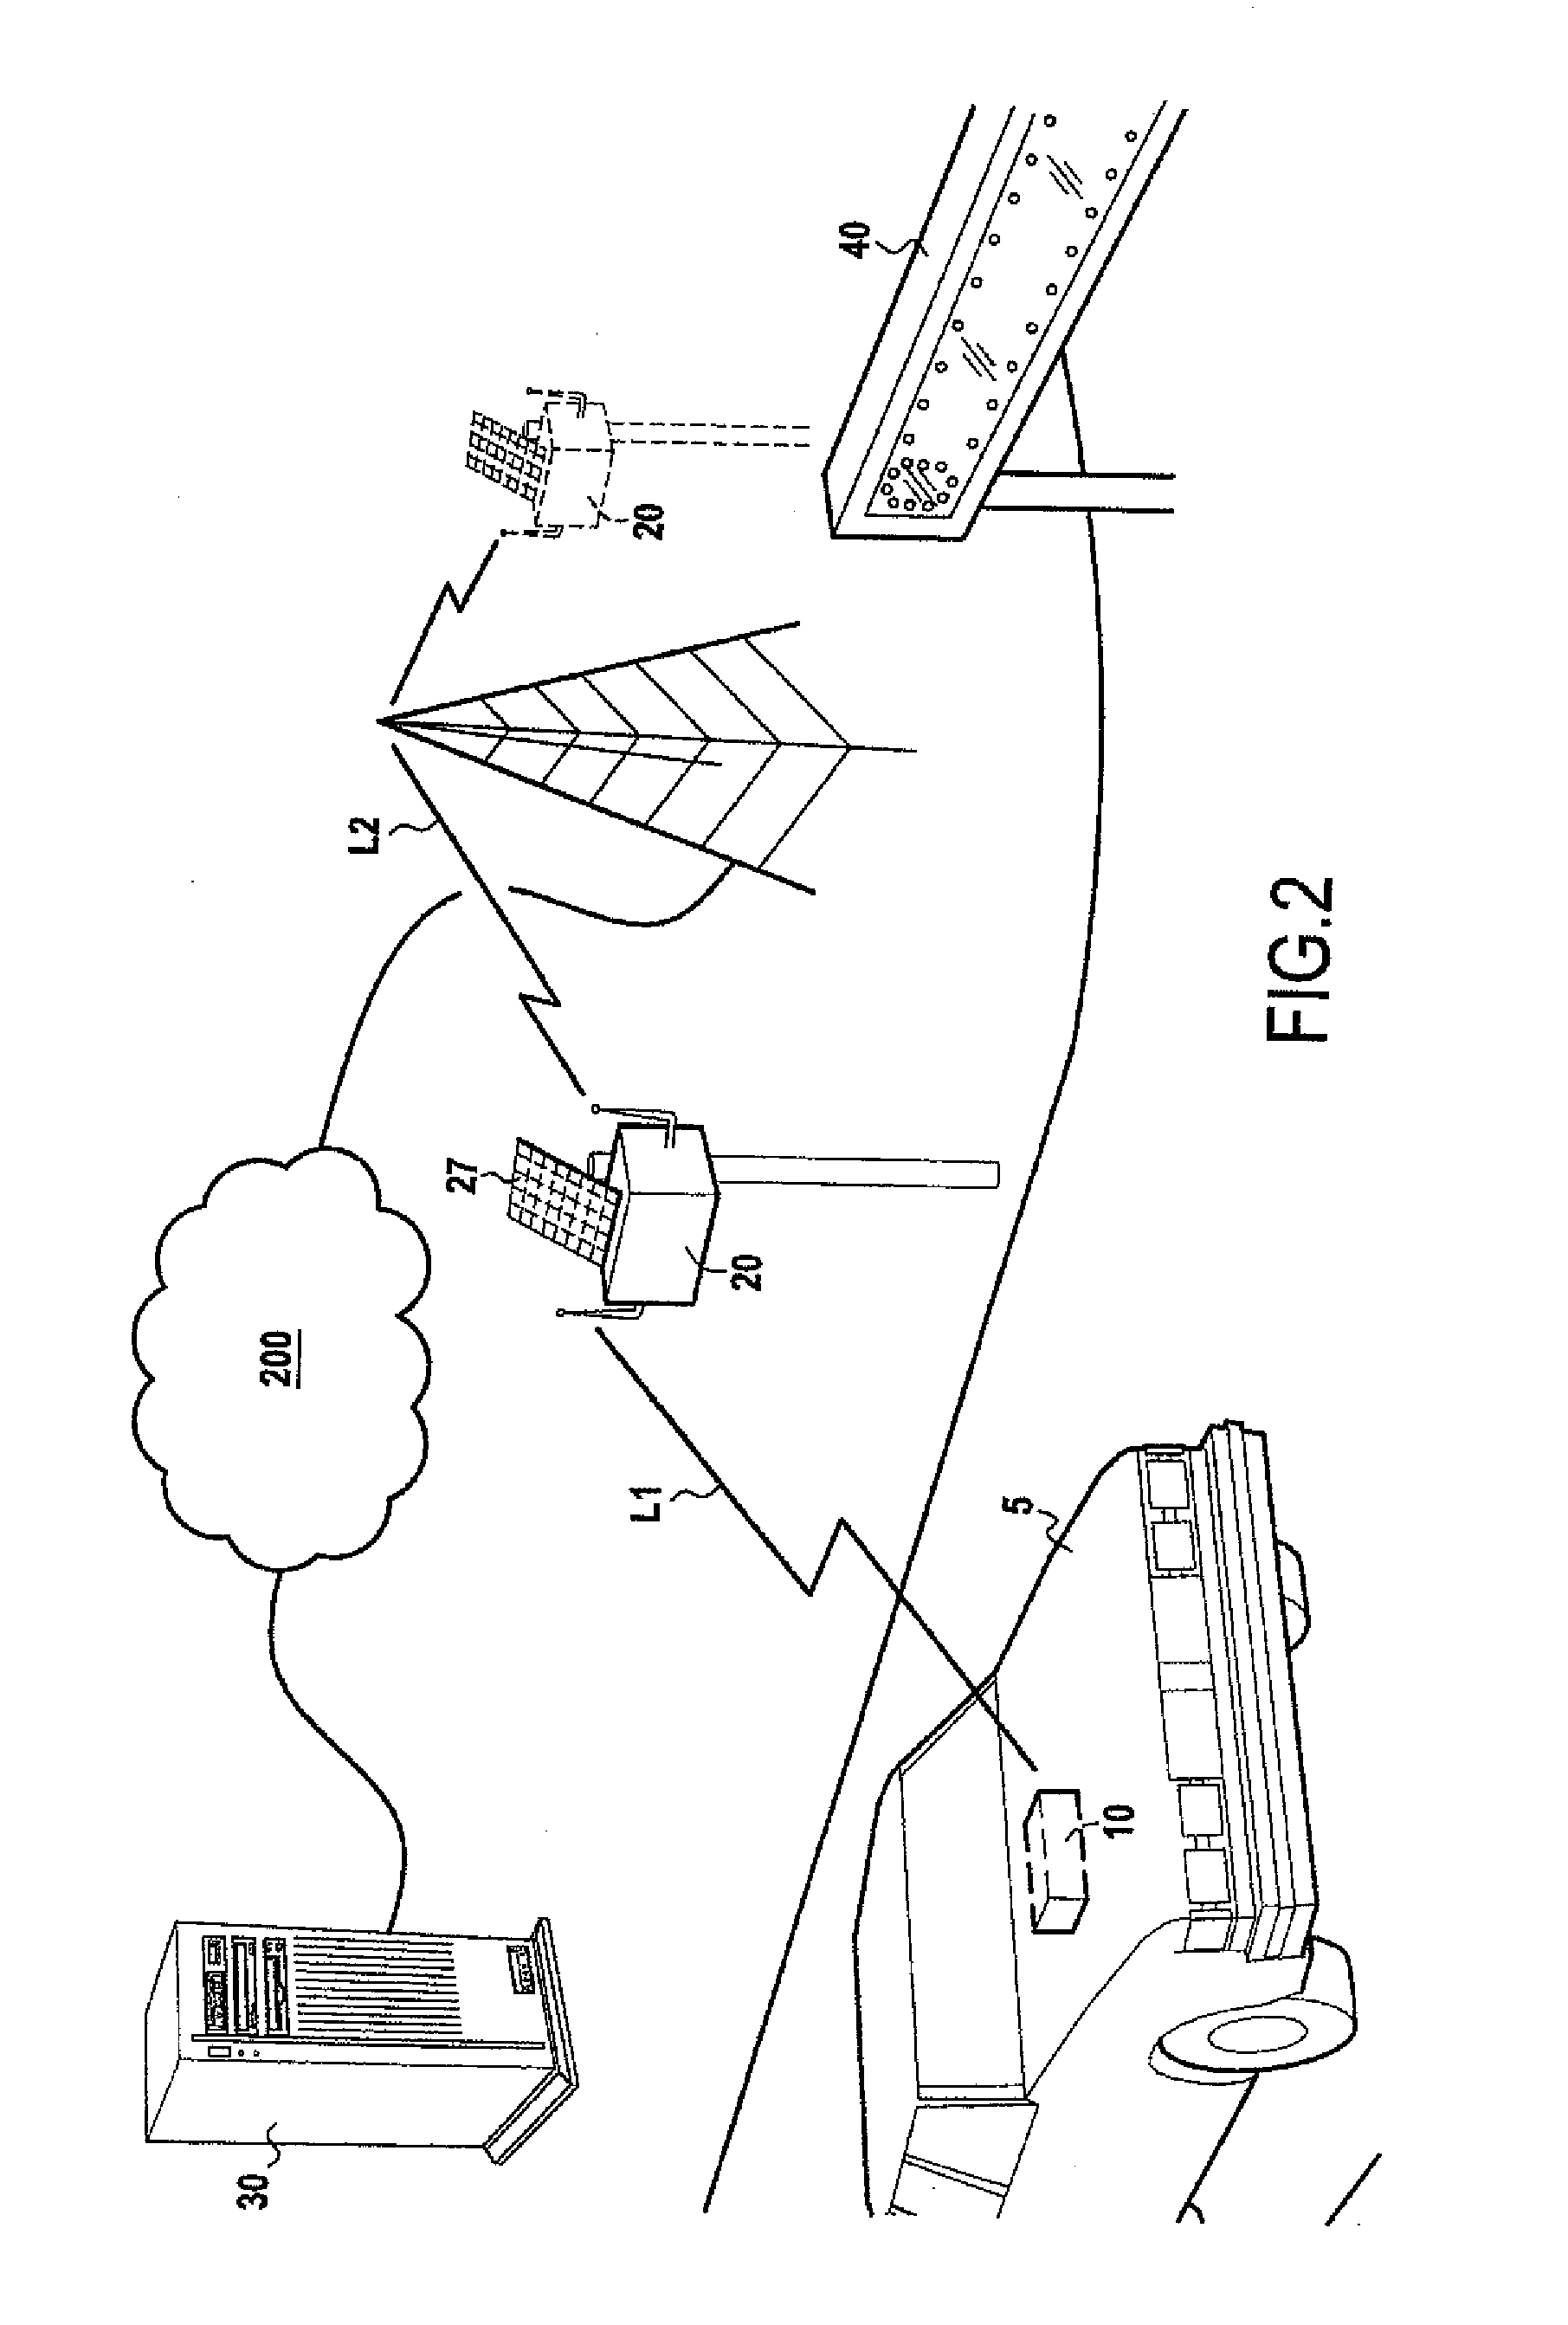 Information System and Method for Traffic in Road Network